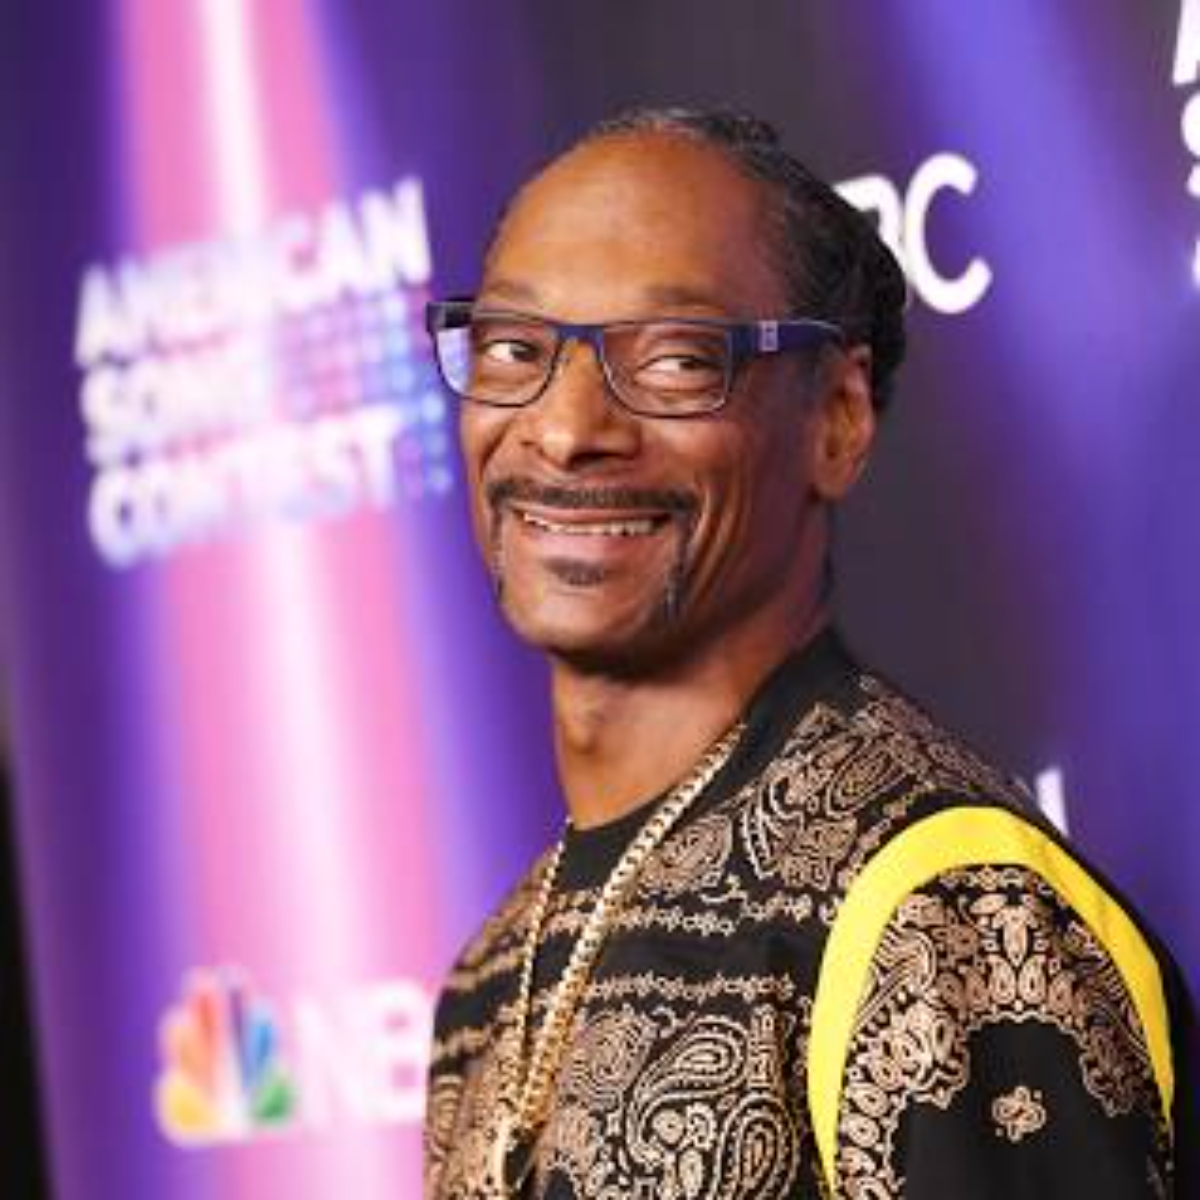 Snoop Dogg’s ‘no smoke’ announcement sparks doubt amid new music release